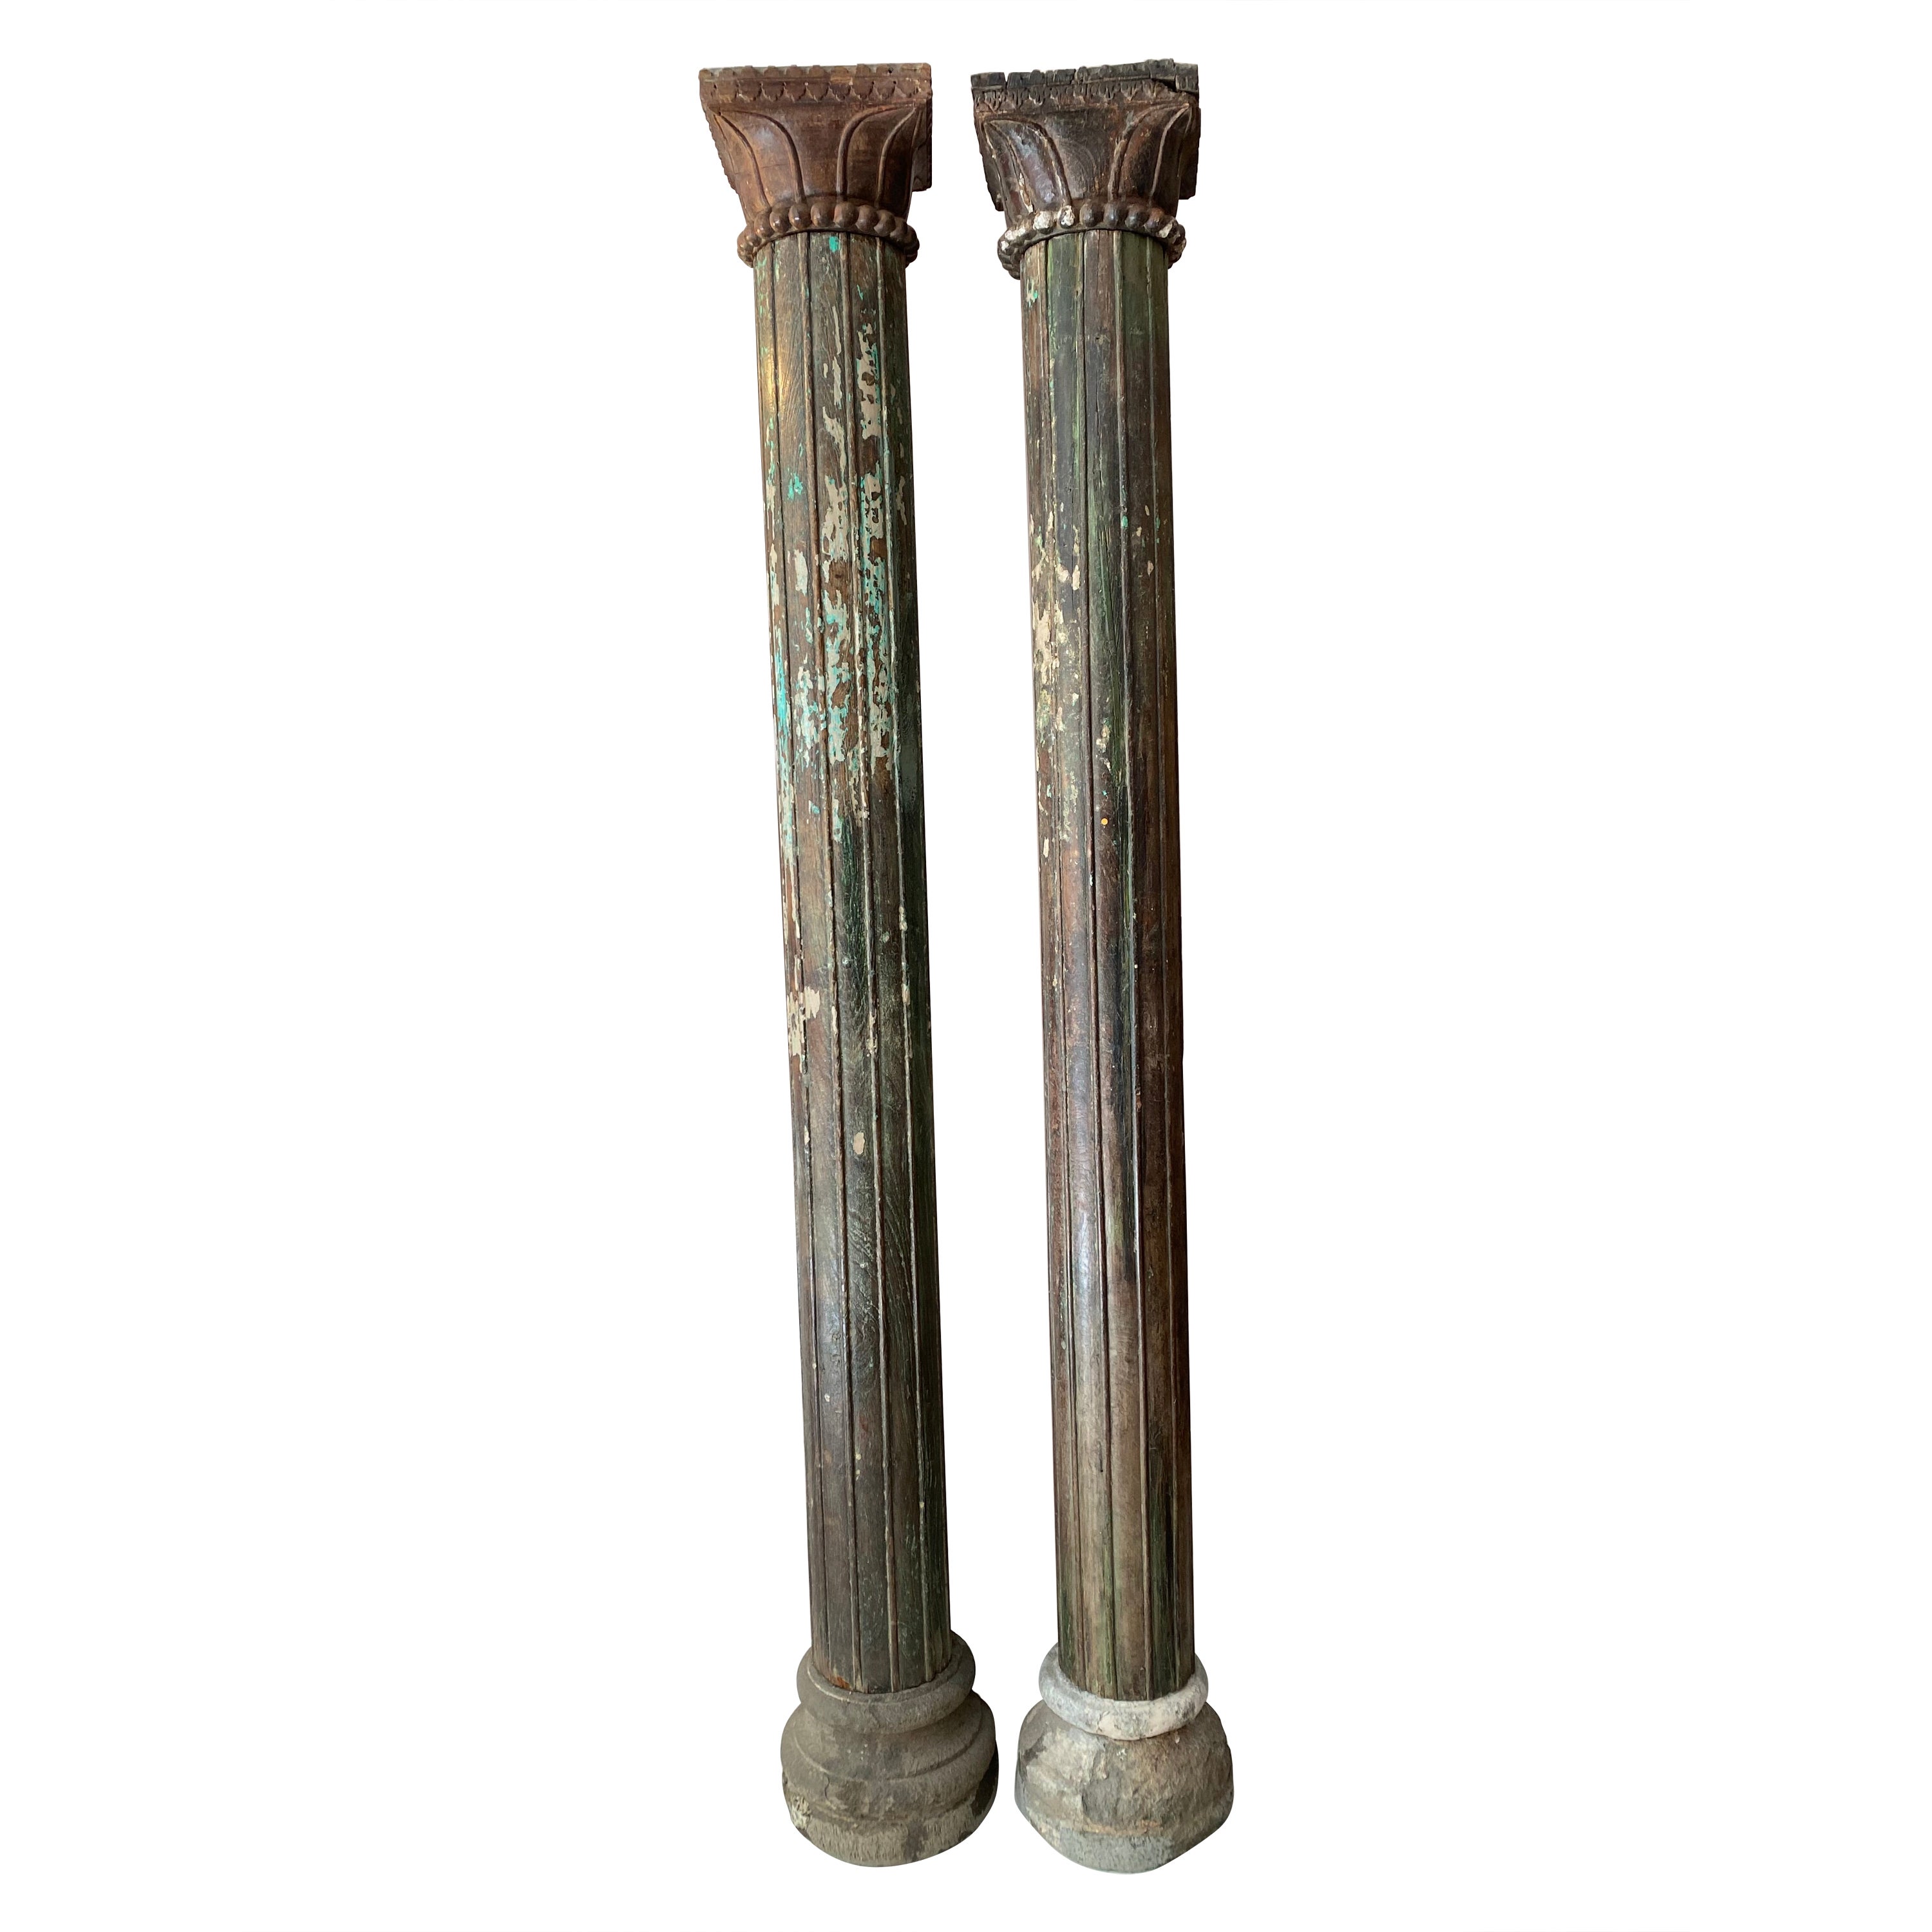 Pair of Indian columns in teak wood from late 19th century